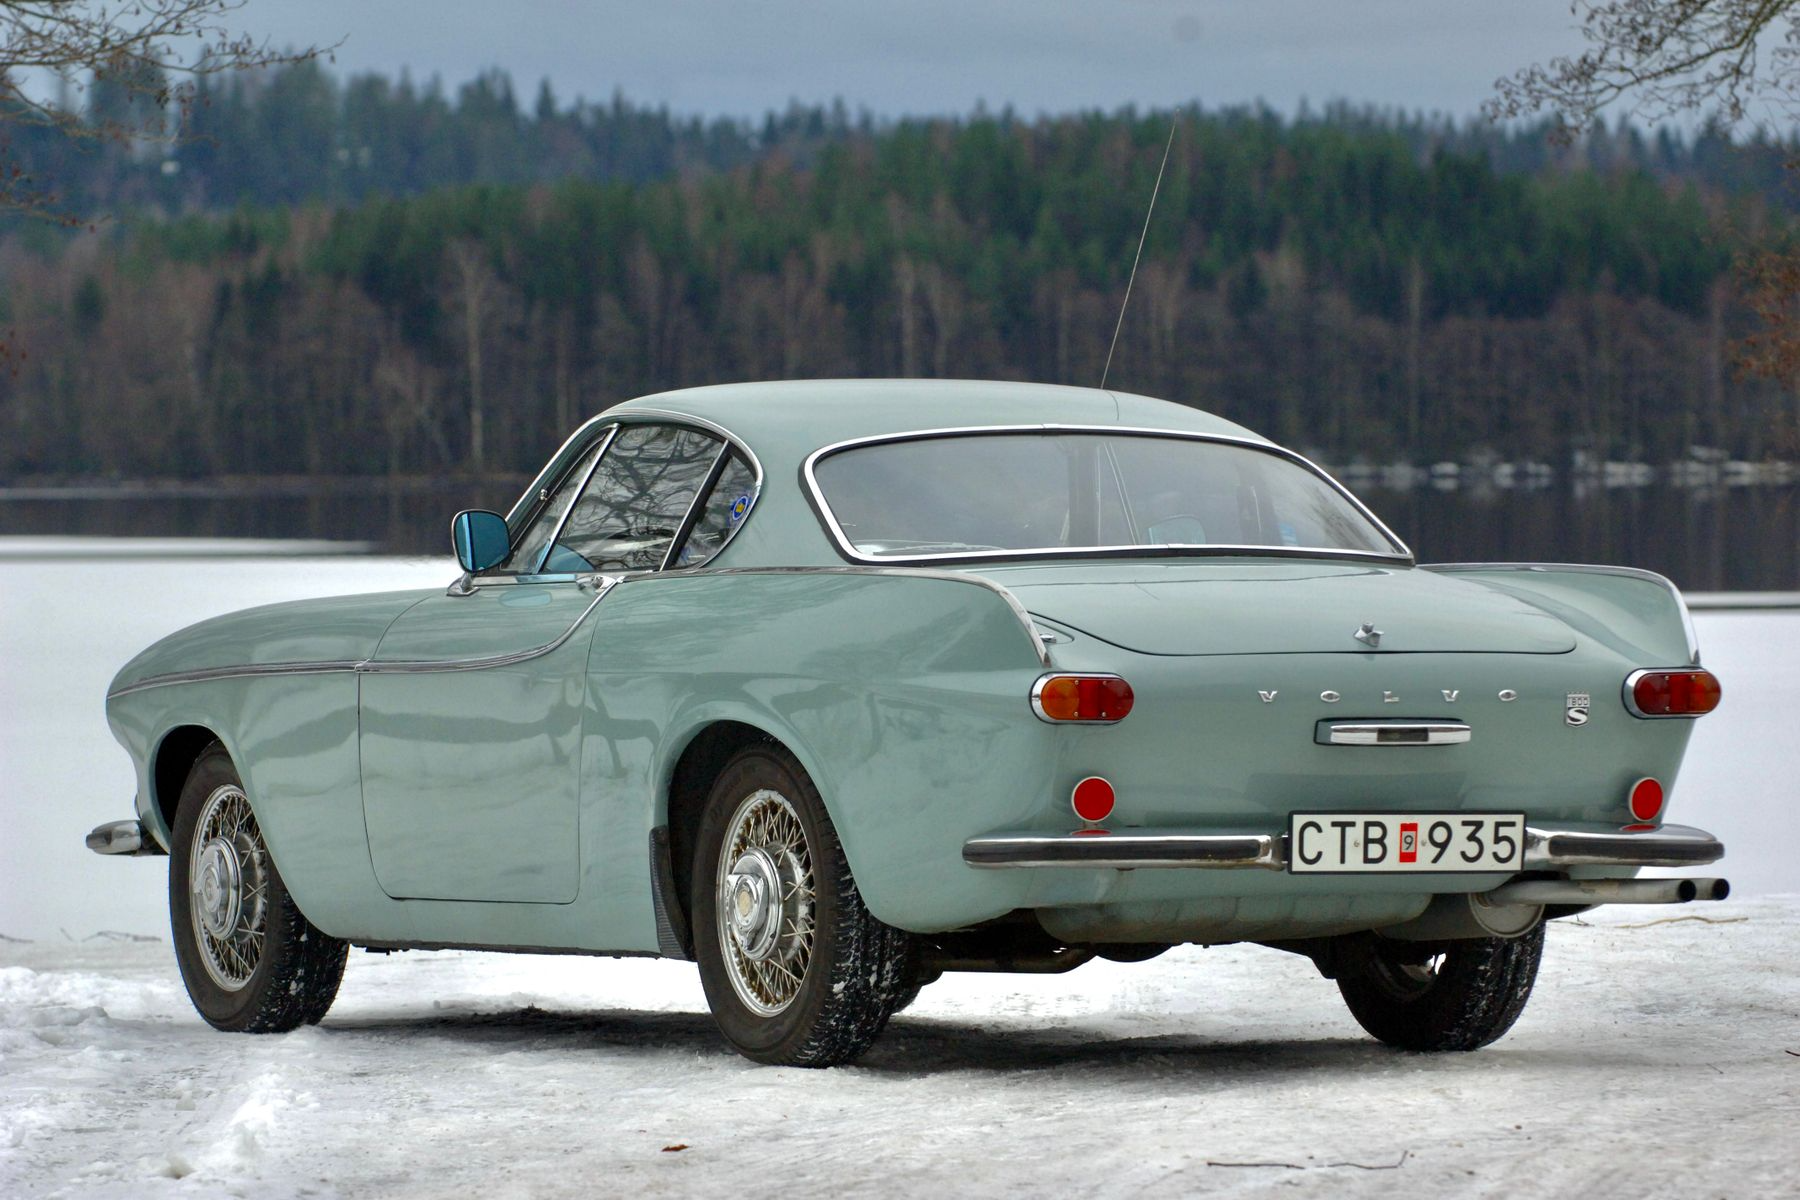 King of Swedens Volvo 1800S 4